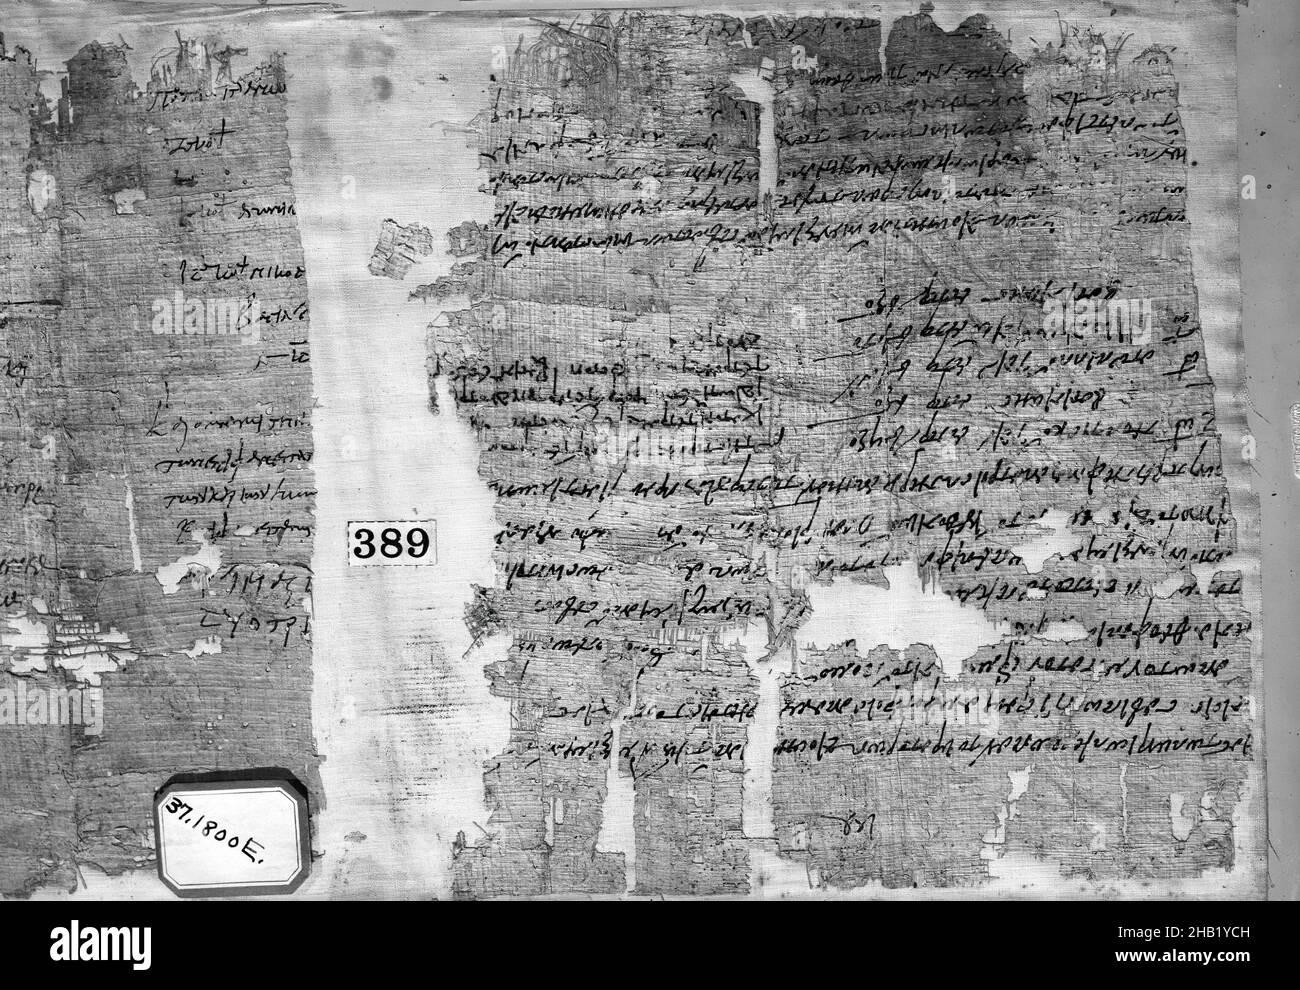 Papyrus Fragments Inscribed in Greek, Papyrus, ink, 303 C.E., Roman Period, Glass: 11 5/16 x 27 1/2 in., 28.8 x 69.8 cm, Egyptian, Greek text, Inscribed, Papyrus, Roman Period Stock Photo